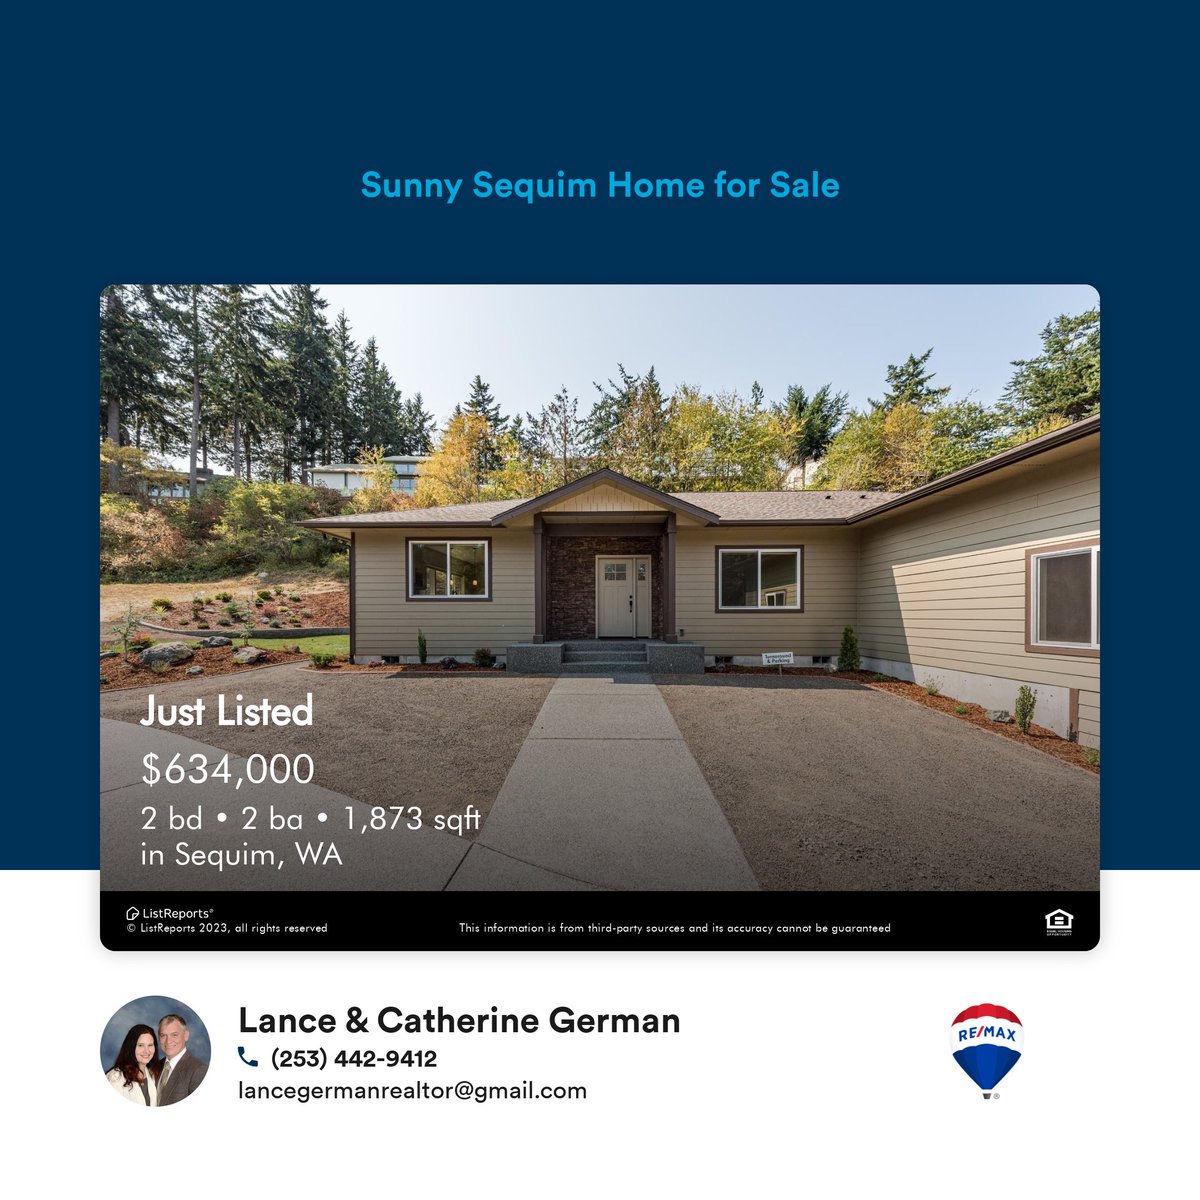 Call for a tour 253.442.9412.

#sequim #sequimwa #sequimwashington #sequimhomeforsale #movingtosequim #movingtosequimwashington #sequimwashingtonusa #newhomeforsale #customhome #sequimnewconstructionhome #customhomeforsale #customhomebuild #sequimhome